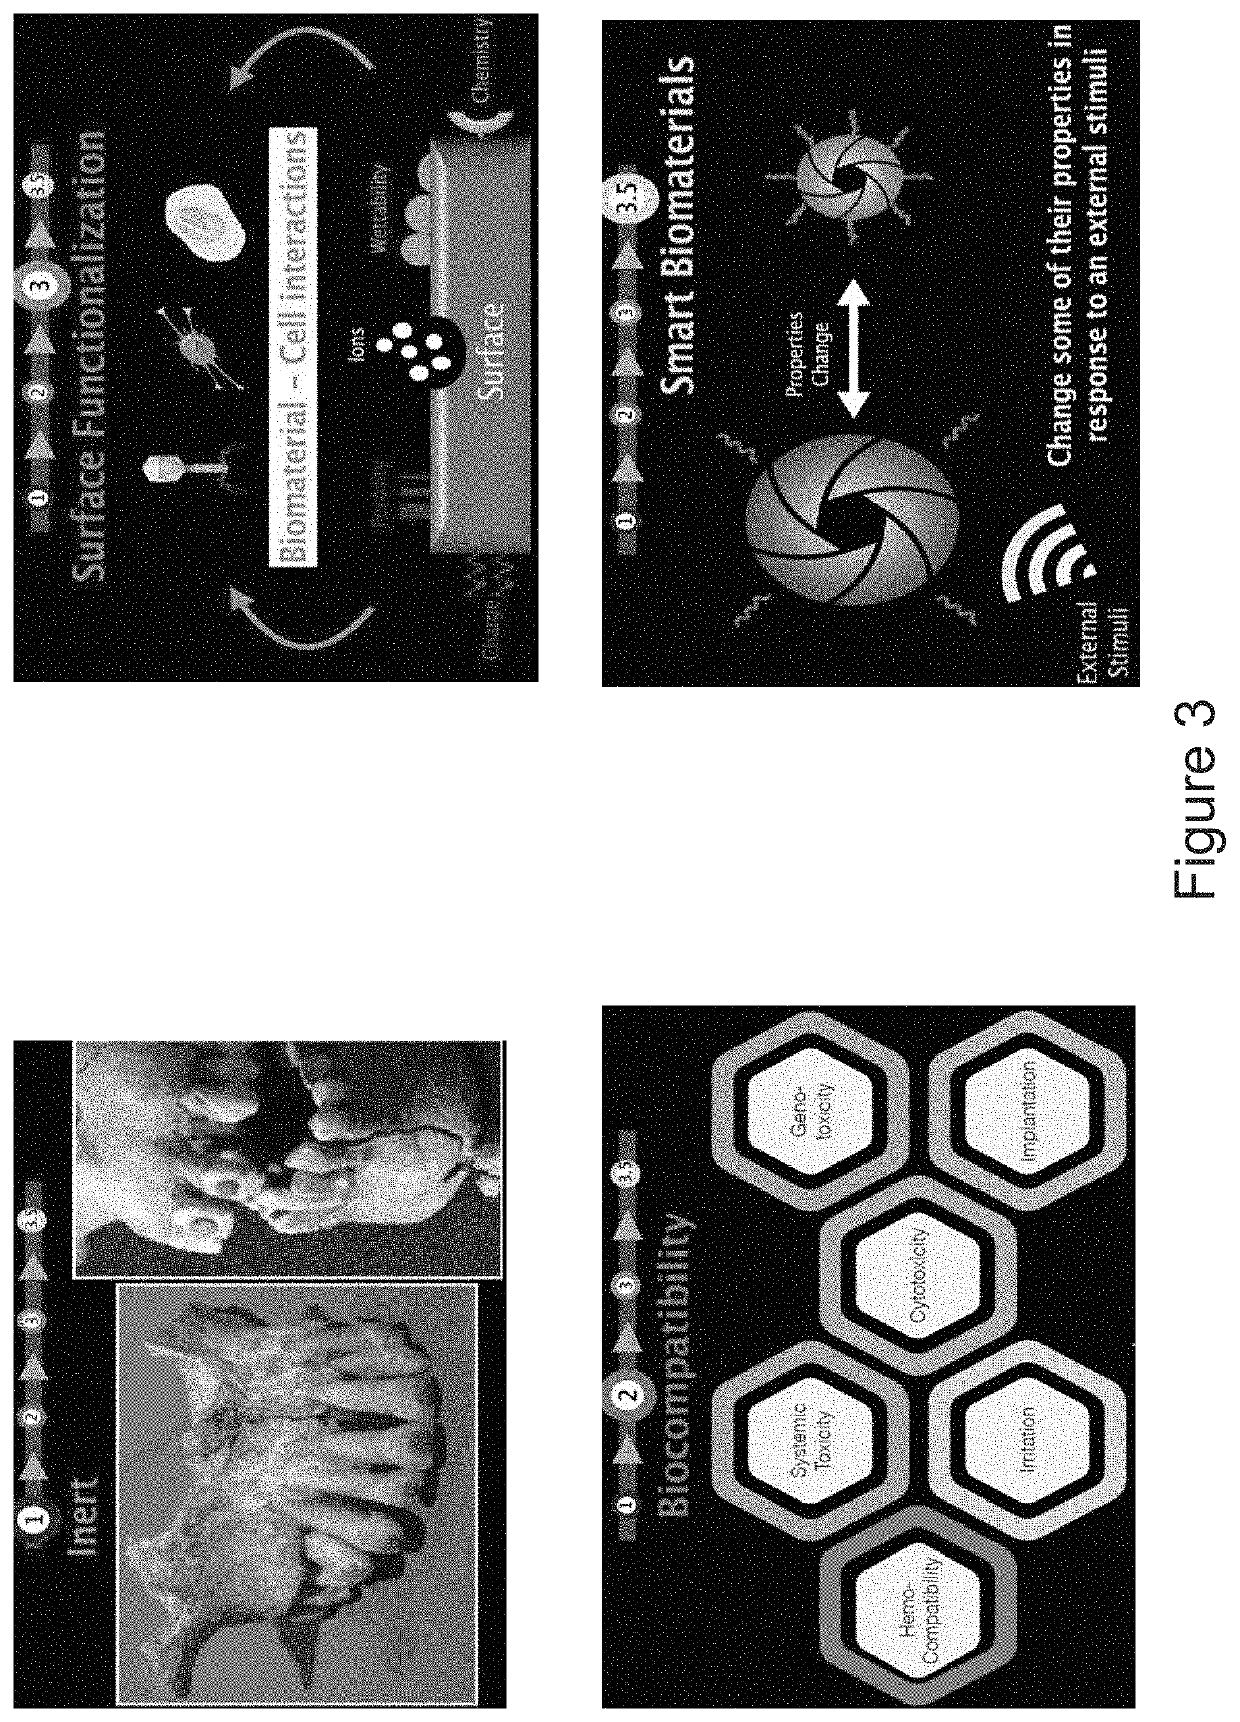 Smart composite with antibiofilm, mineralizing, and  antiinfection therapeutic effects